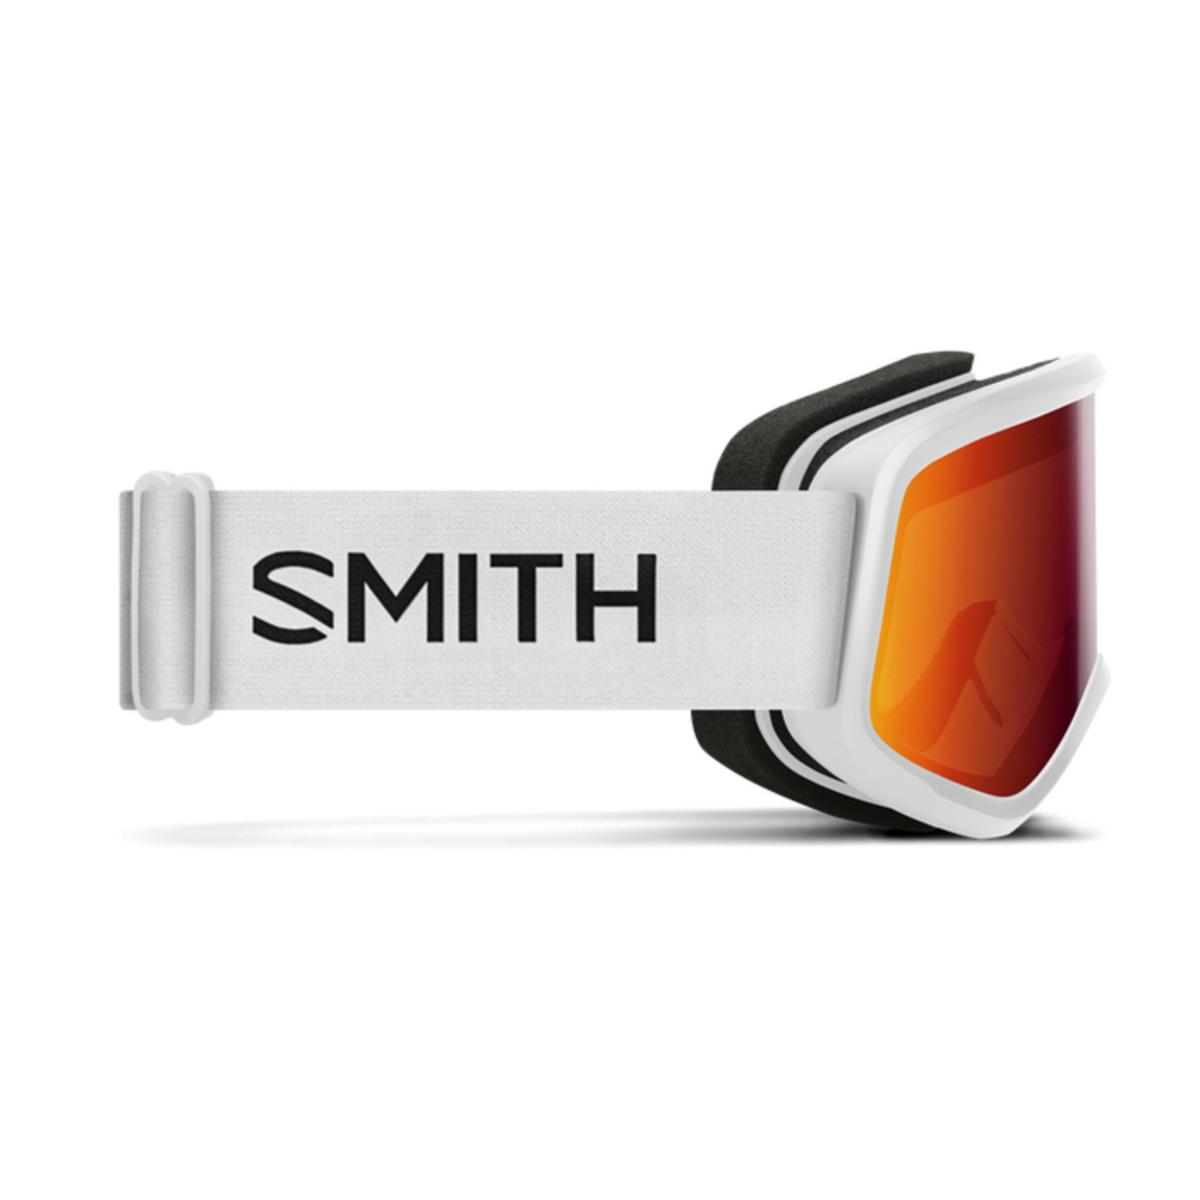 Smith Optics Snowday Youth Goggles Red Sol-X Mirror - White Frame